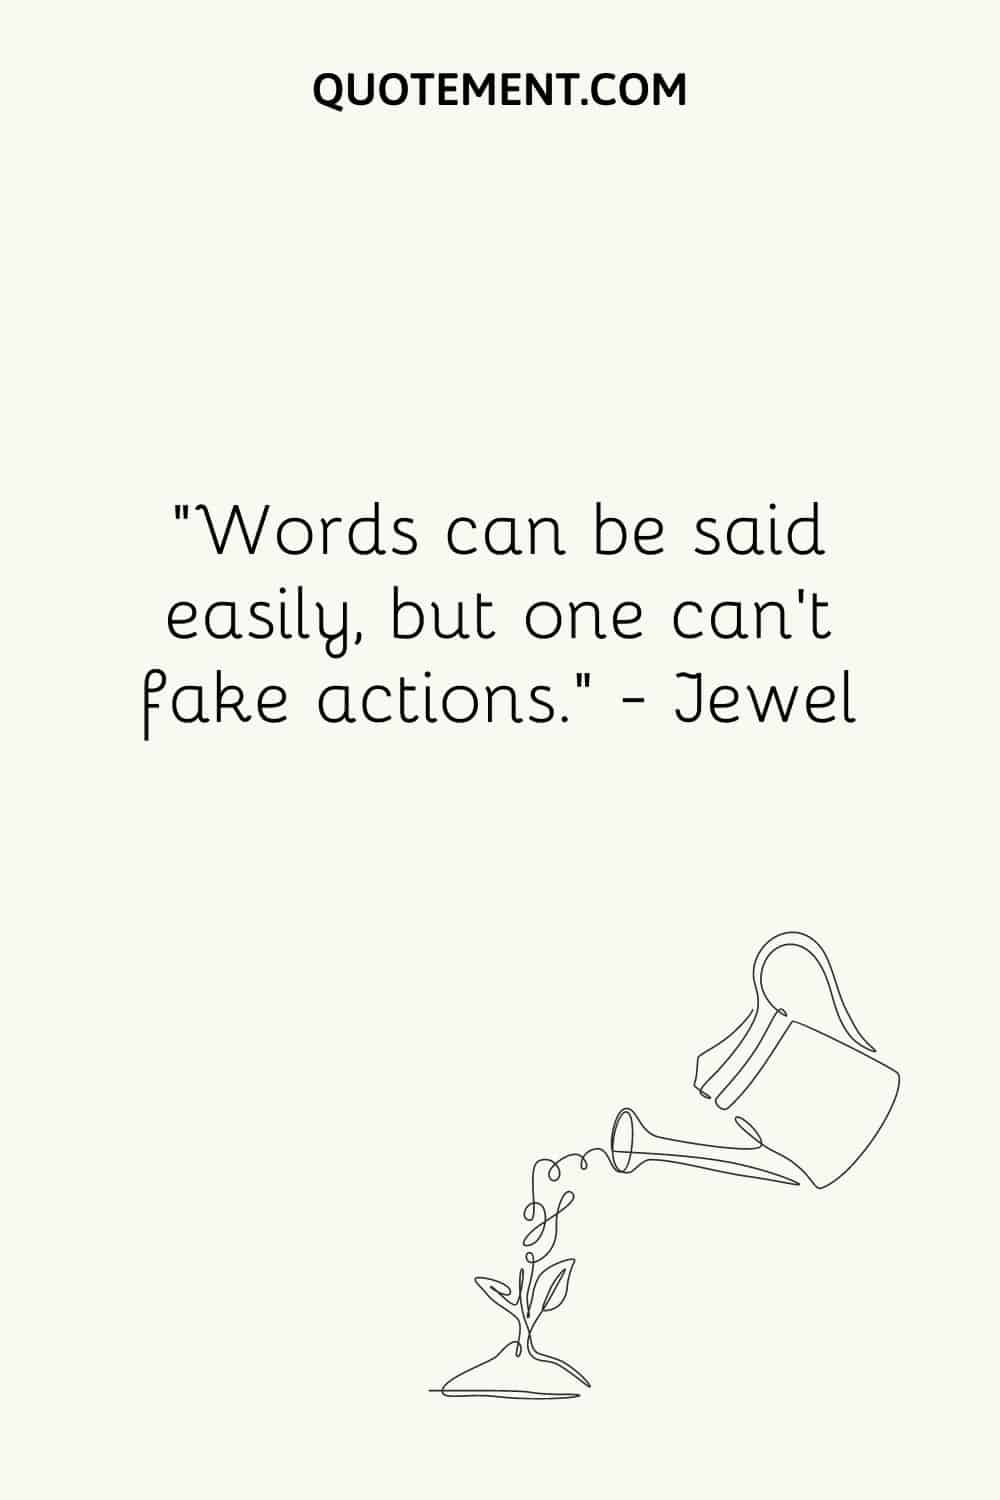 Words can be said easily, but one can’t fake actions